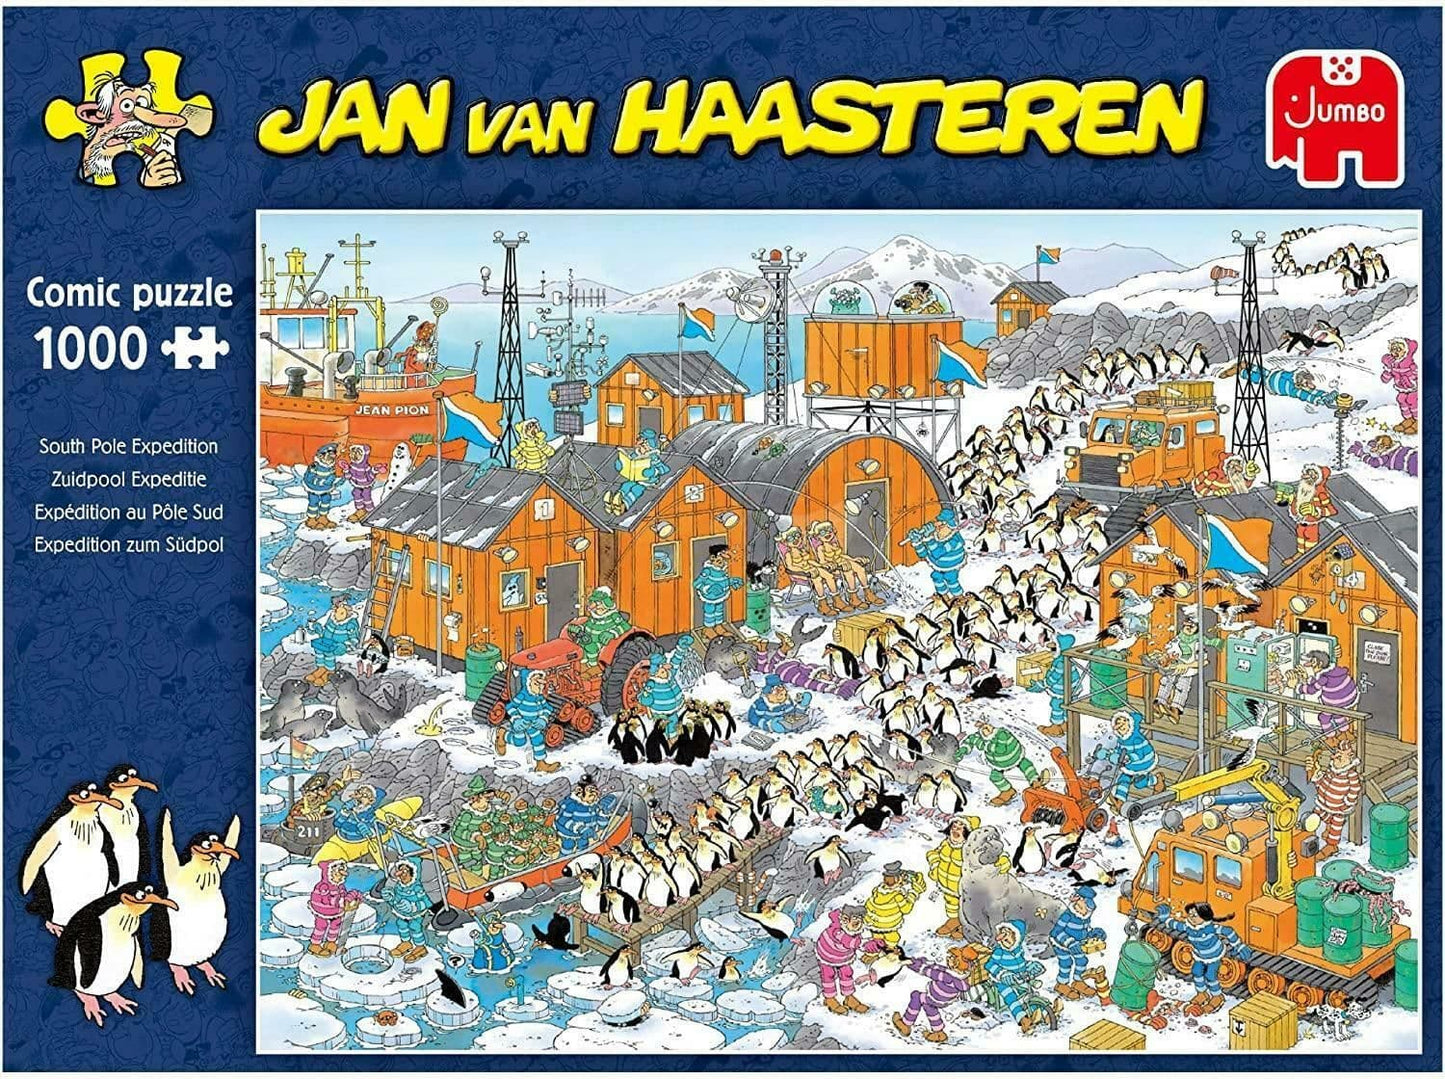 Jan van Haasteren - South Pole Expedition - 1000 Piece Jigsaw Puzzle